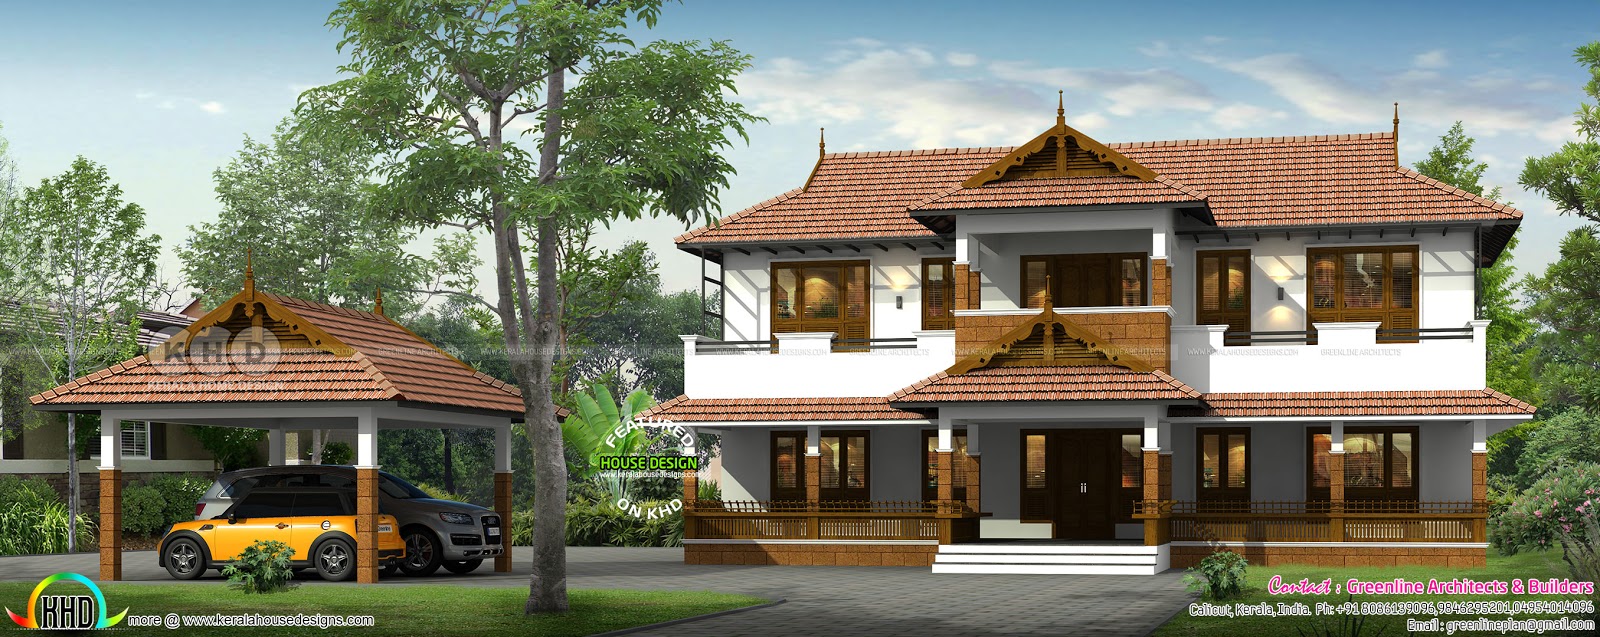 Kerala traditional house with detached car porch - Kerala home design